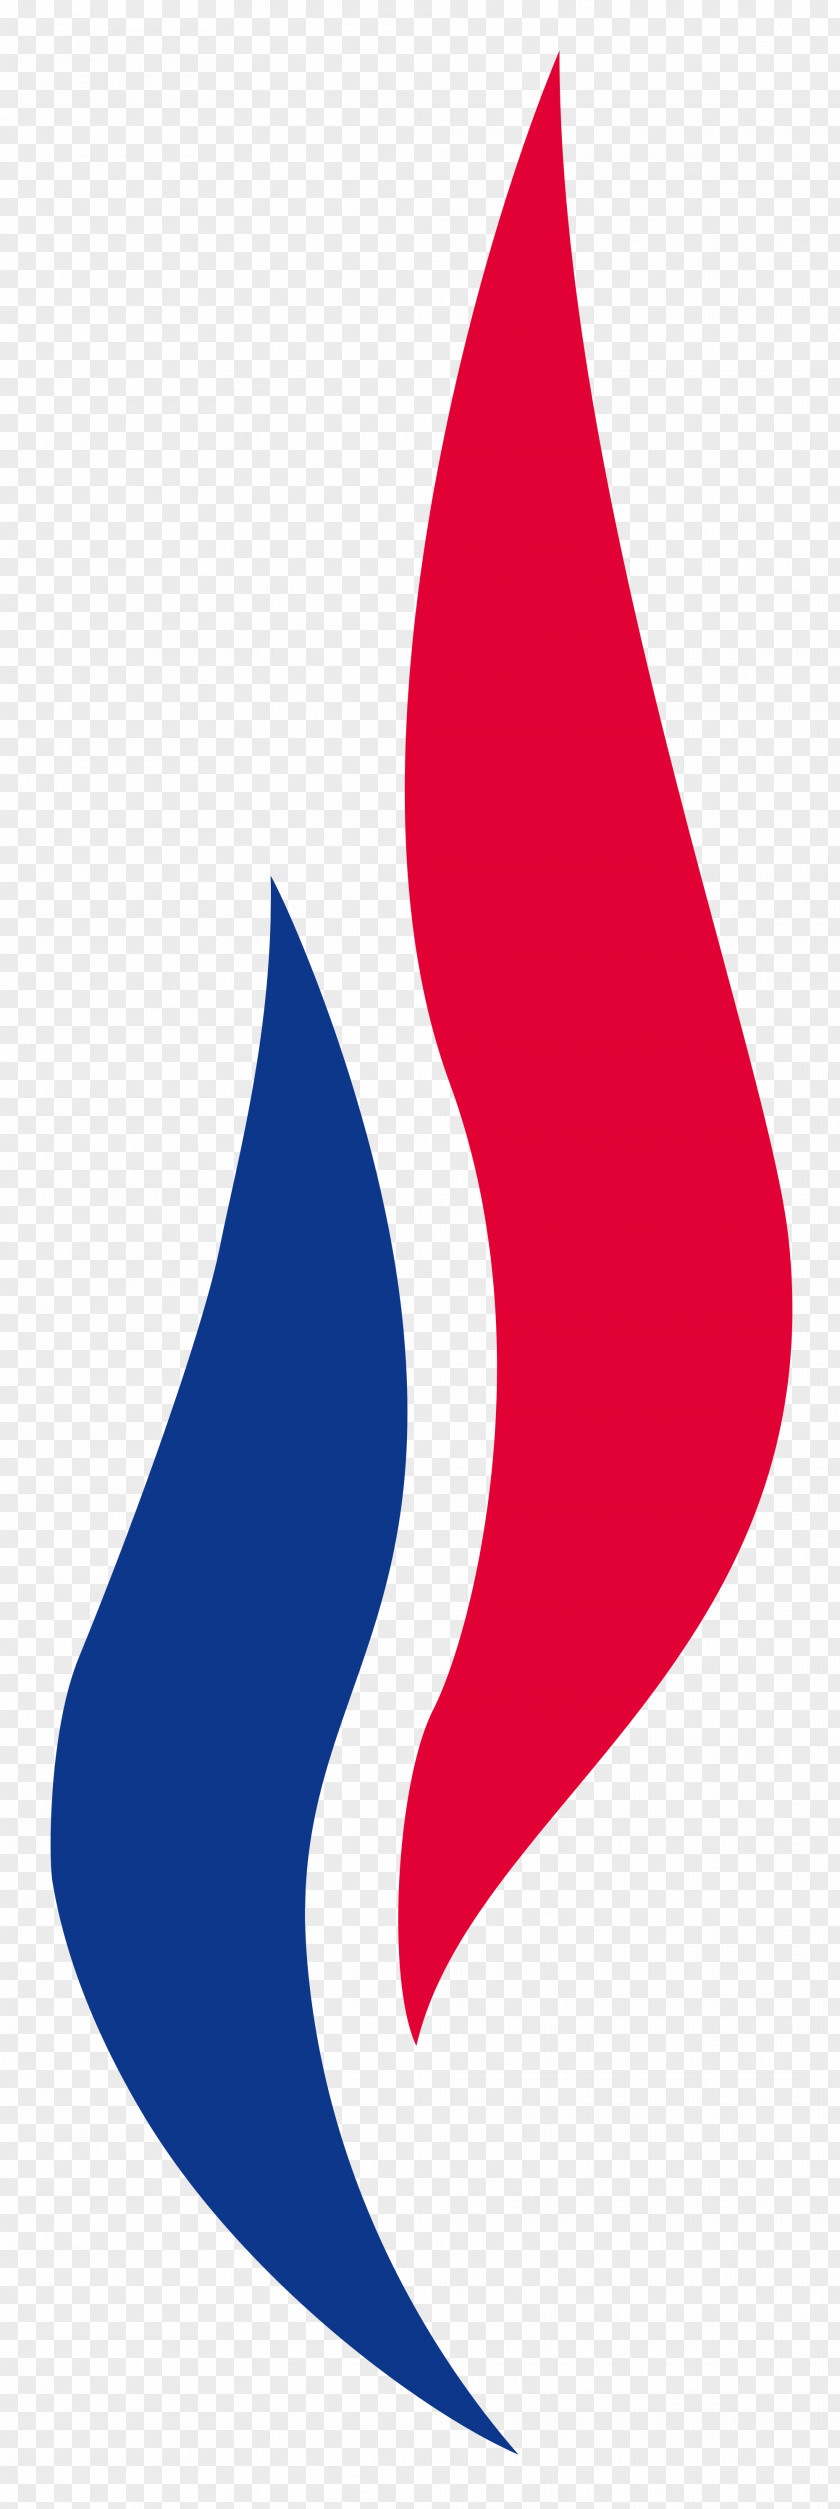 France National Front Political Party Far-right Politics Logo PNG